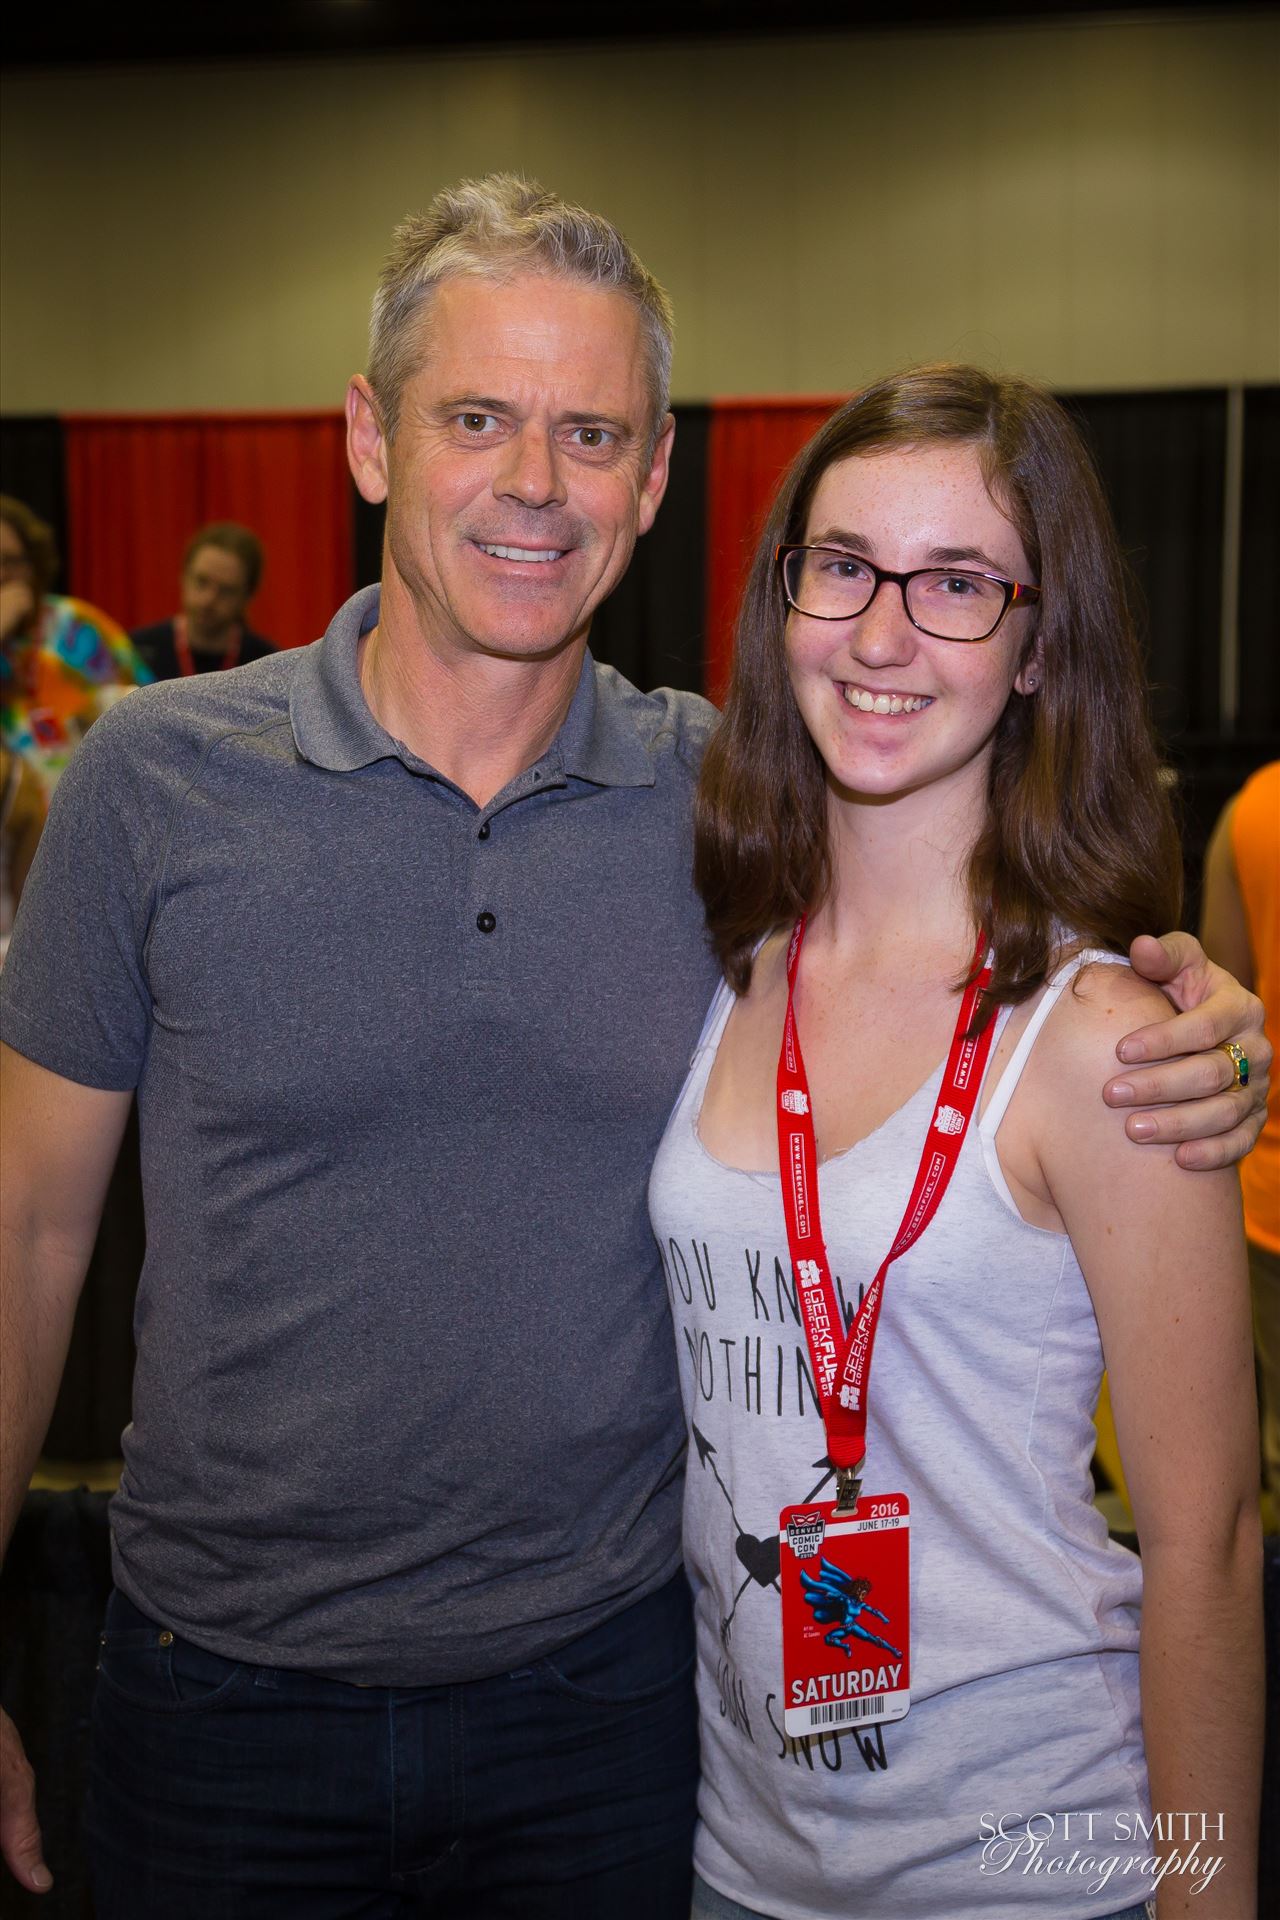 Denver Comic Con 2016 10 Denver Comic Con 2016 at the Colorado Convention Center. C. Thomas Howell with my daughter. by Scott Smith Photos